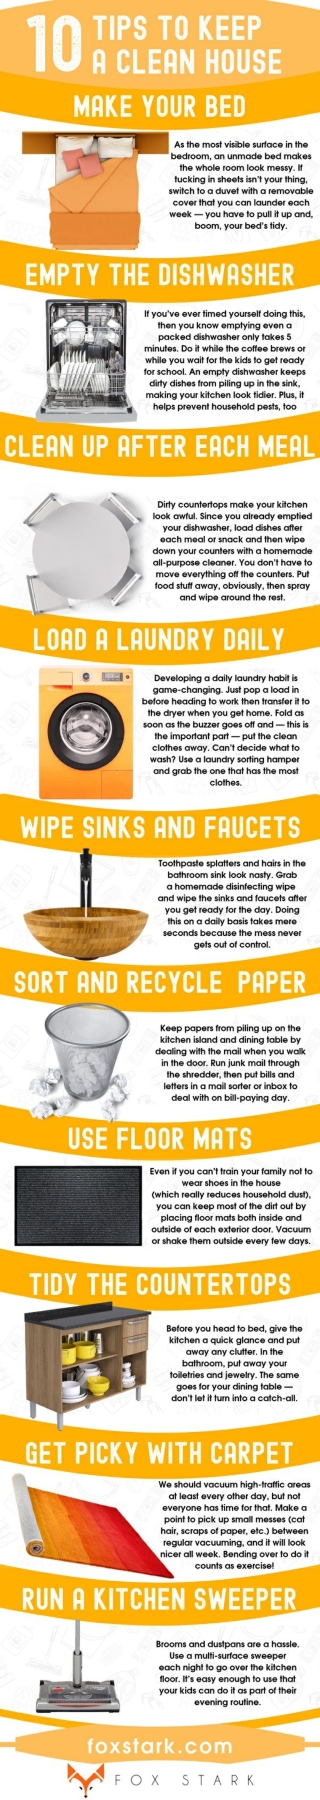 10 Tips to Keep a Clean House